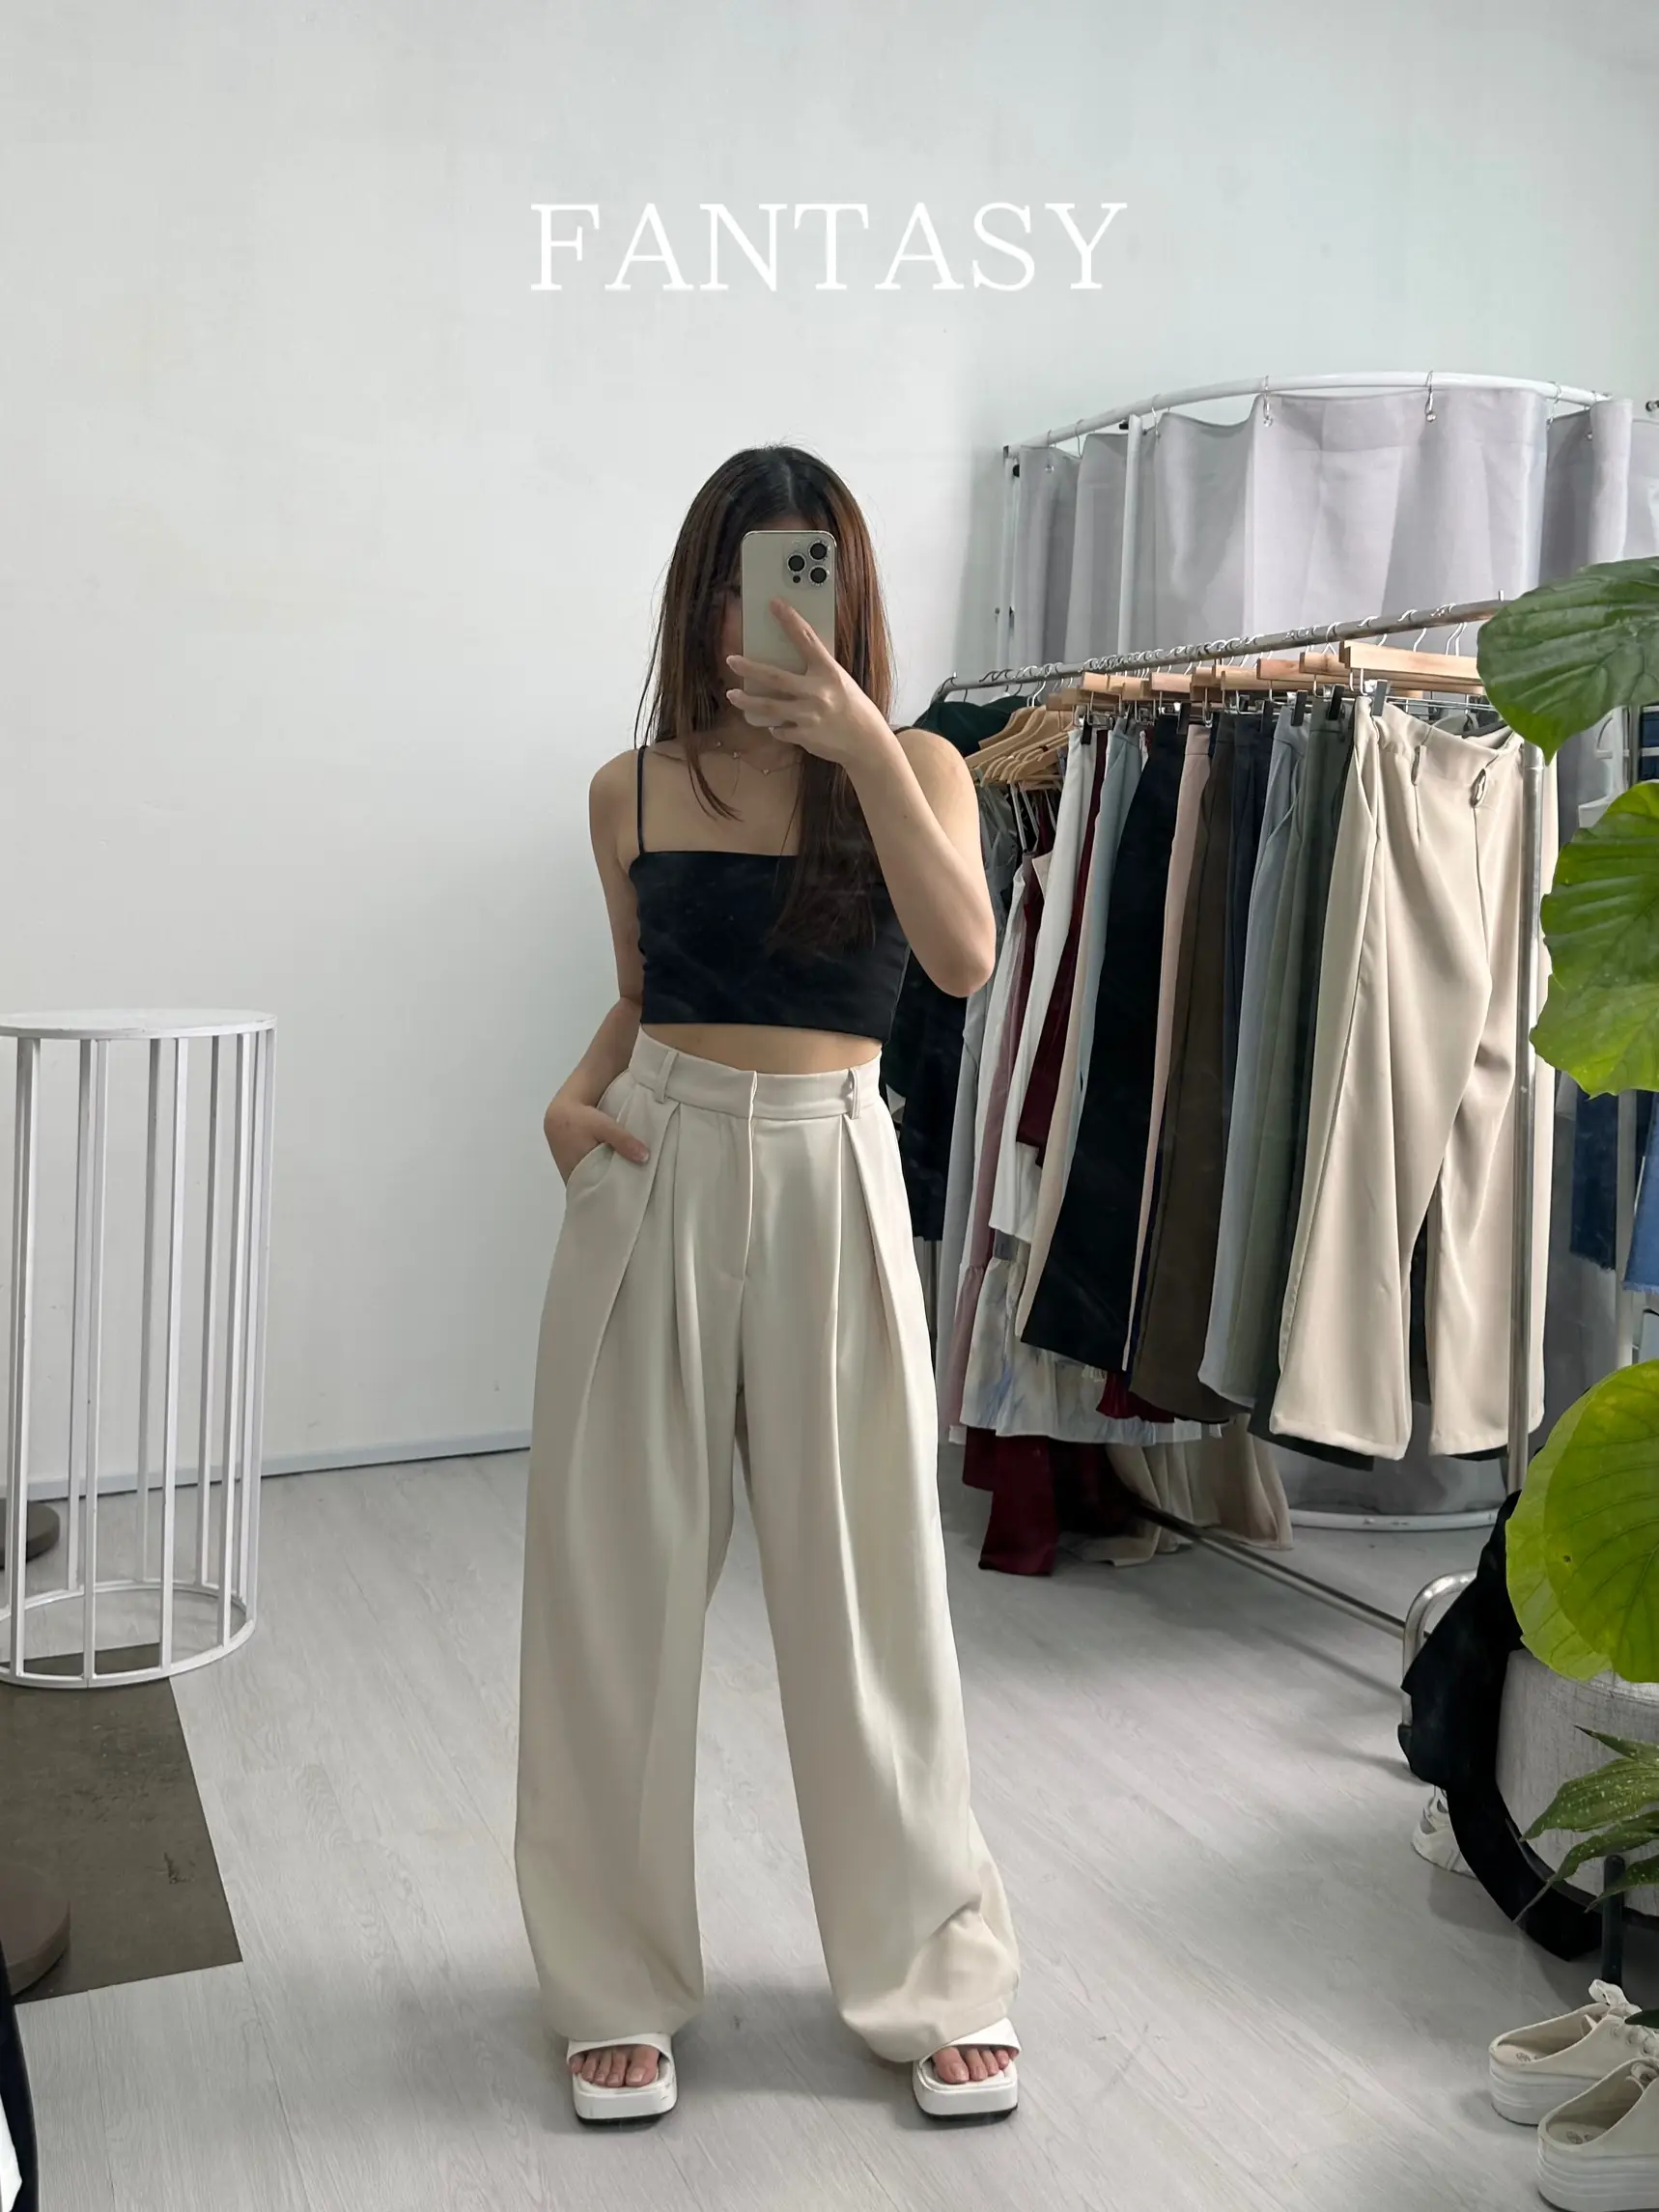 High Waisted Wide Leg Dress Pants - The Untidy Closet  High waist outfits,  Wide leg pants outfit, Khaki pants outfit women